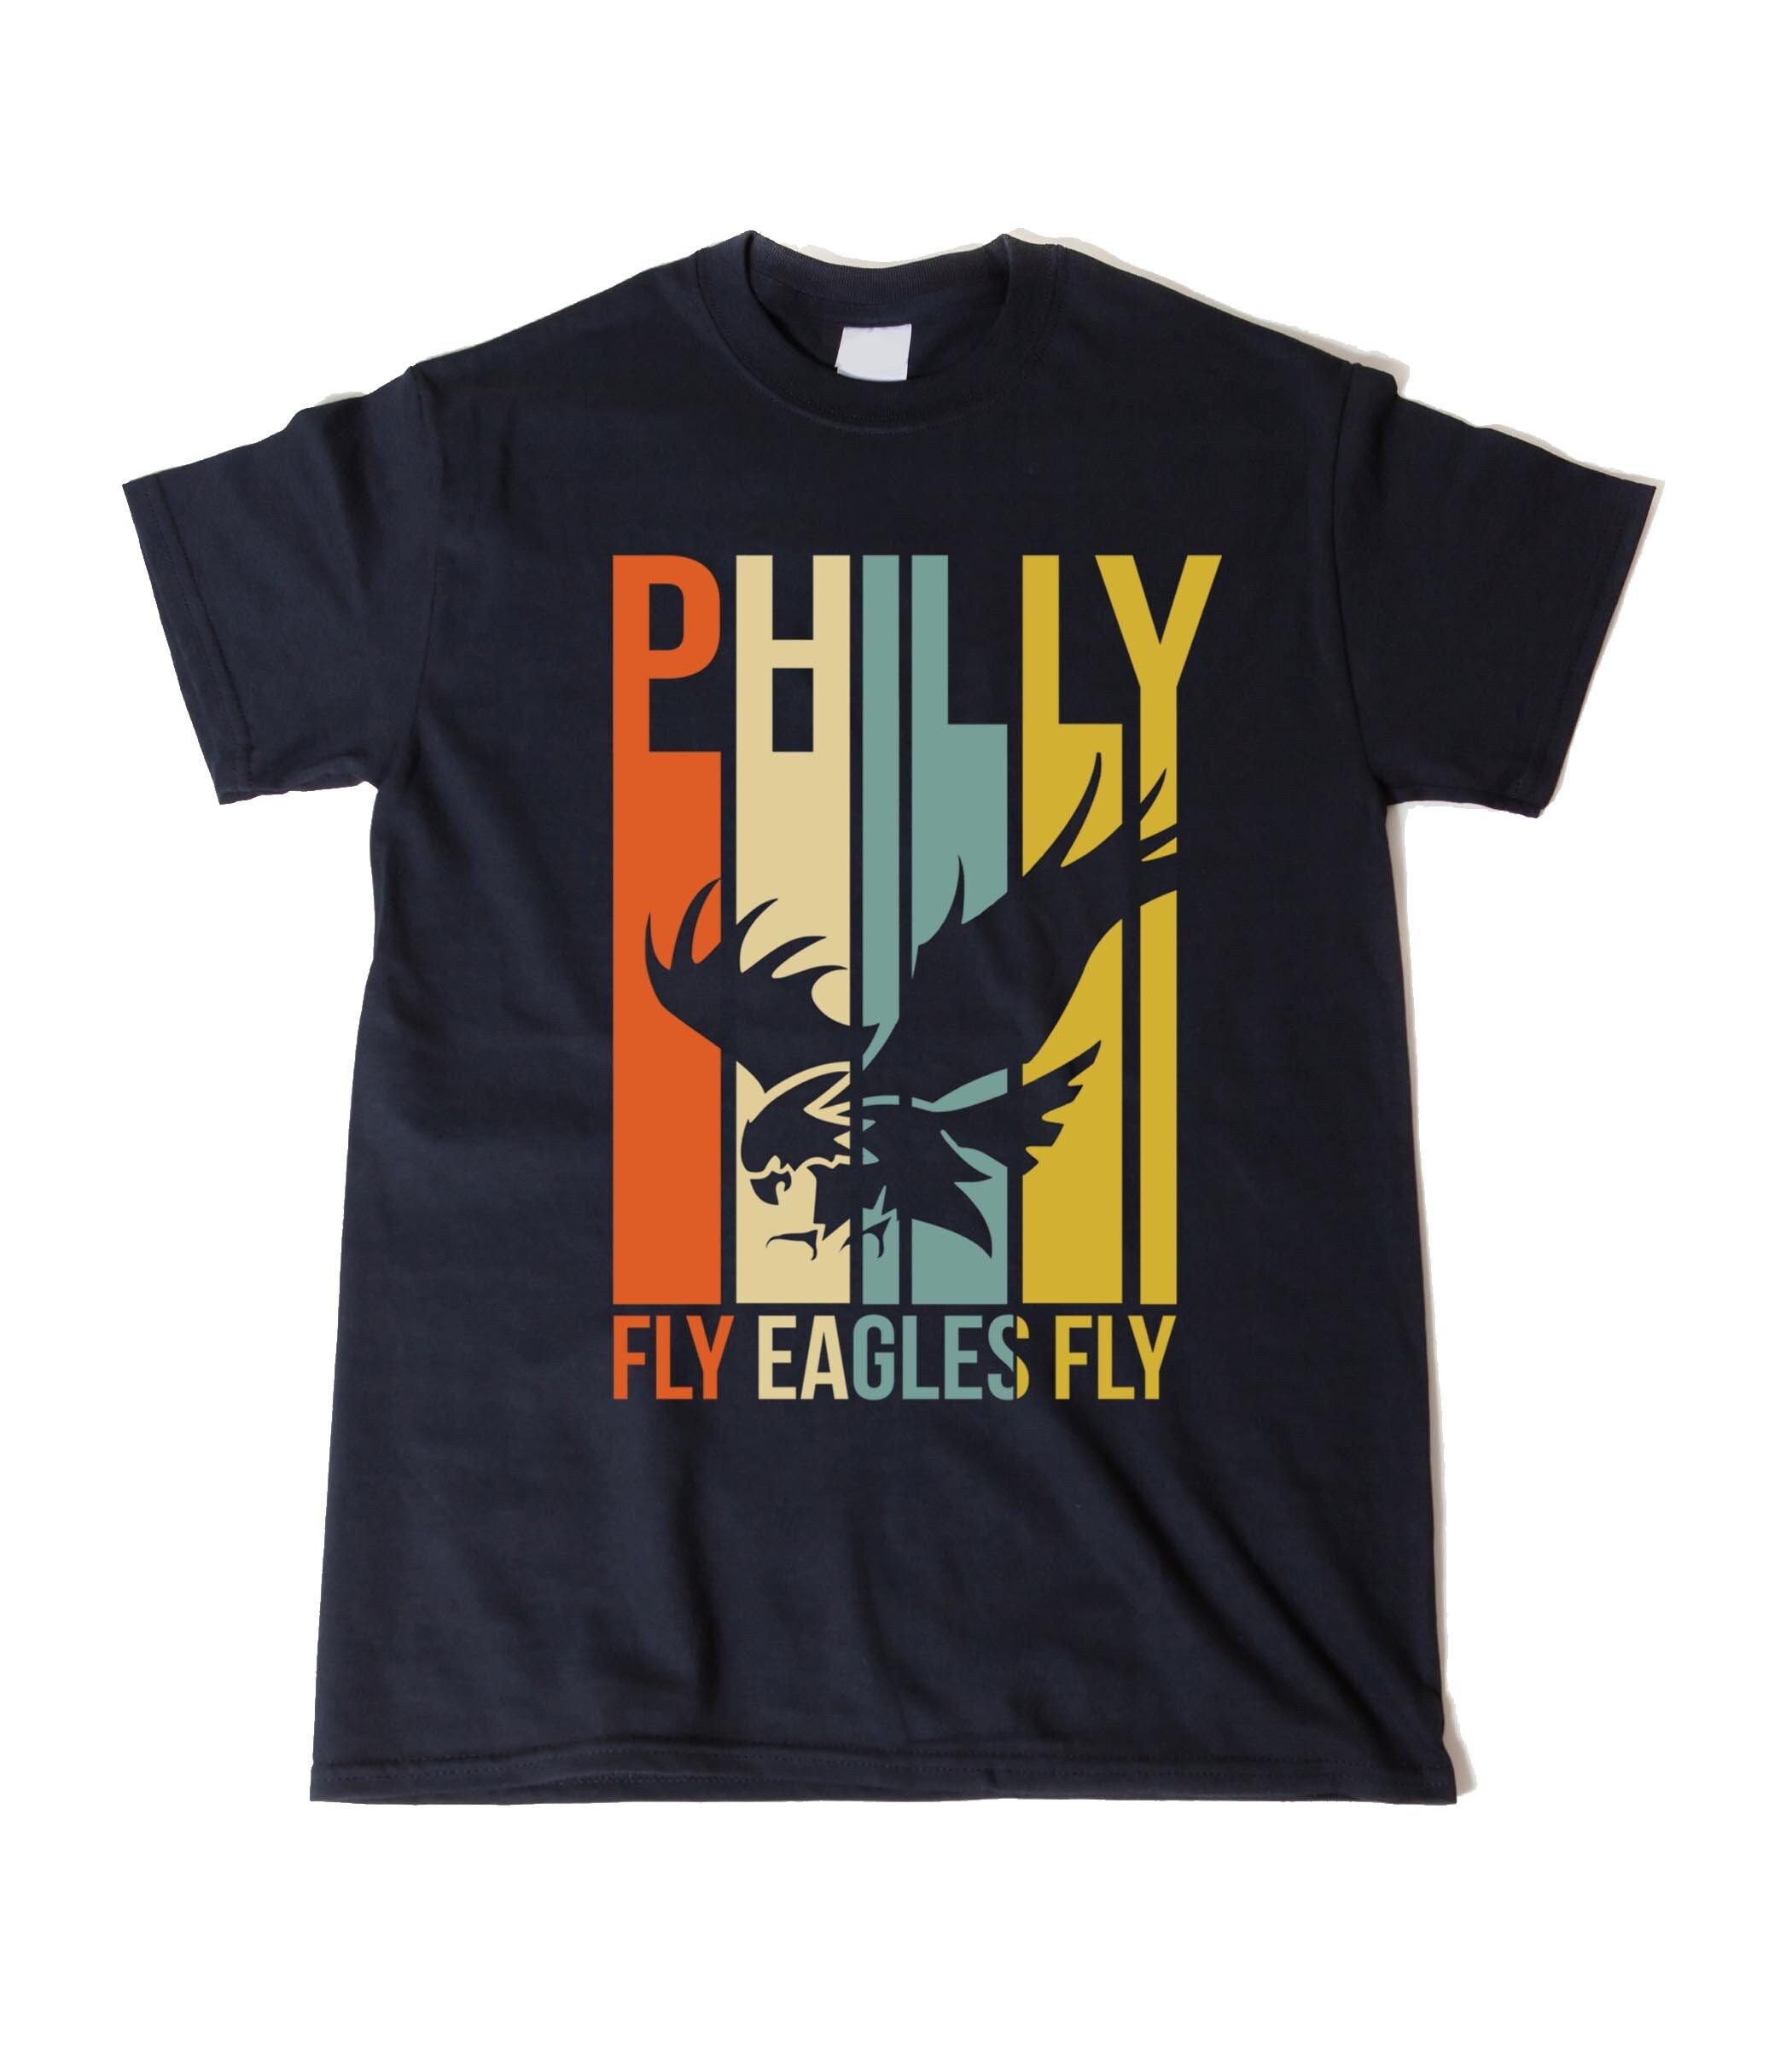 Discover Fly Eagles Shirt, Philly Eagle Go Birds Shirt, Eag.les Champions